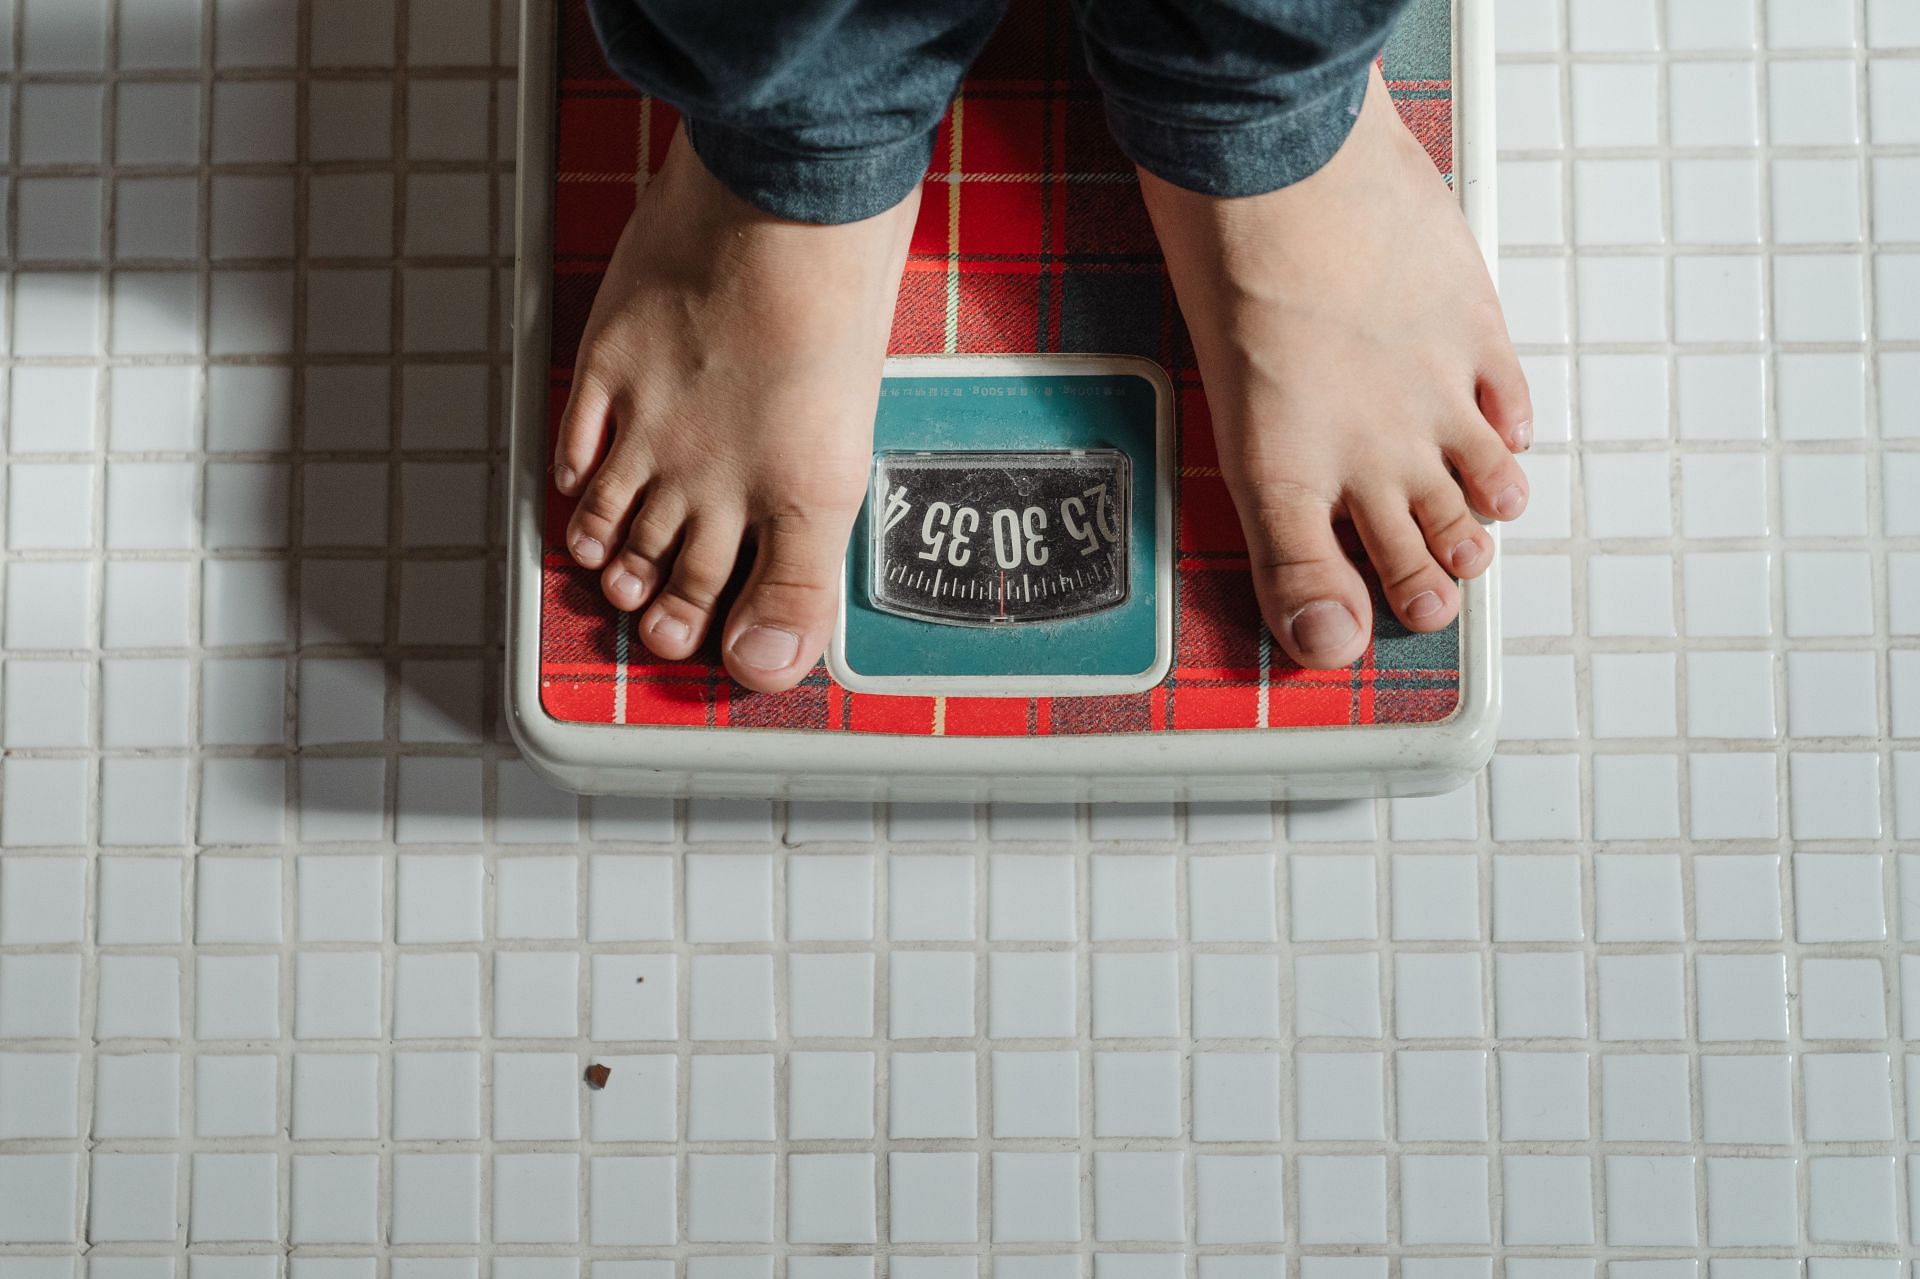 Does Lipozene really help you with the weight loss? (Image by Ketut Subiyanto / Pexels)